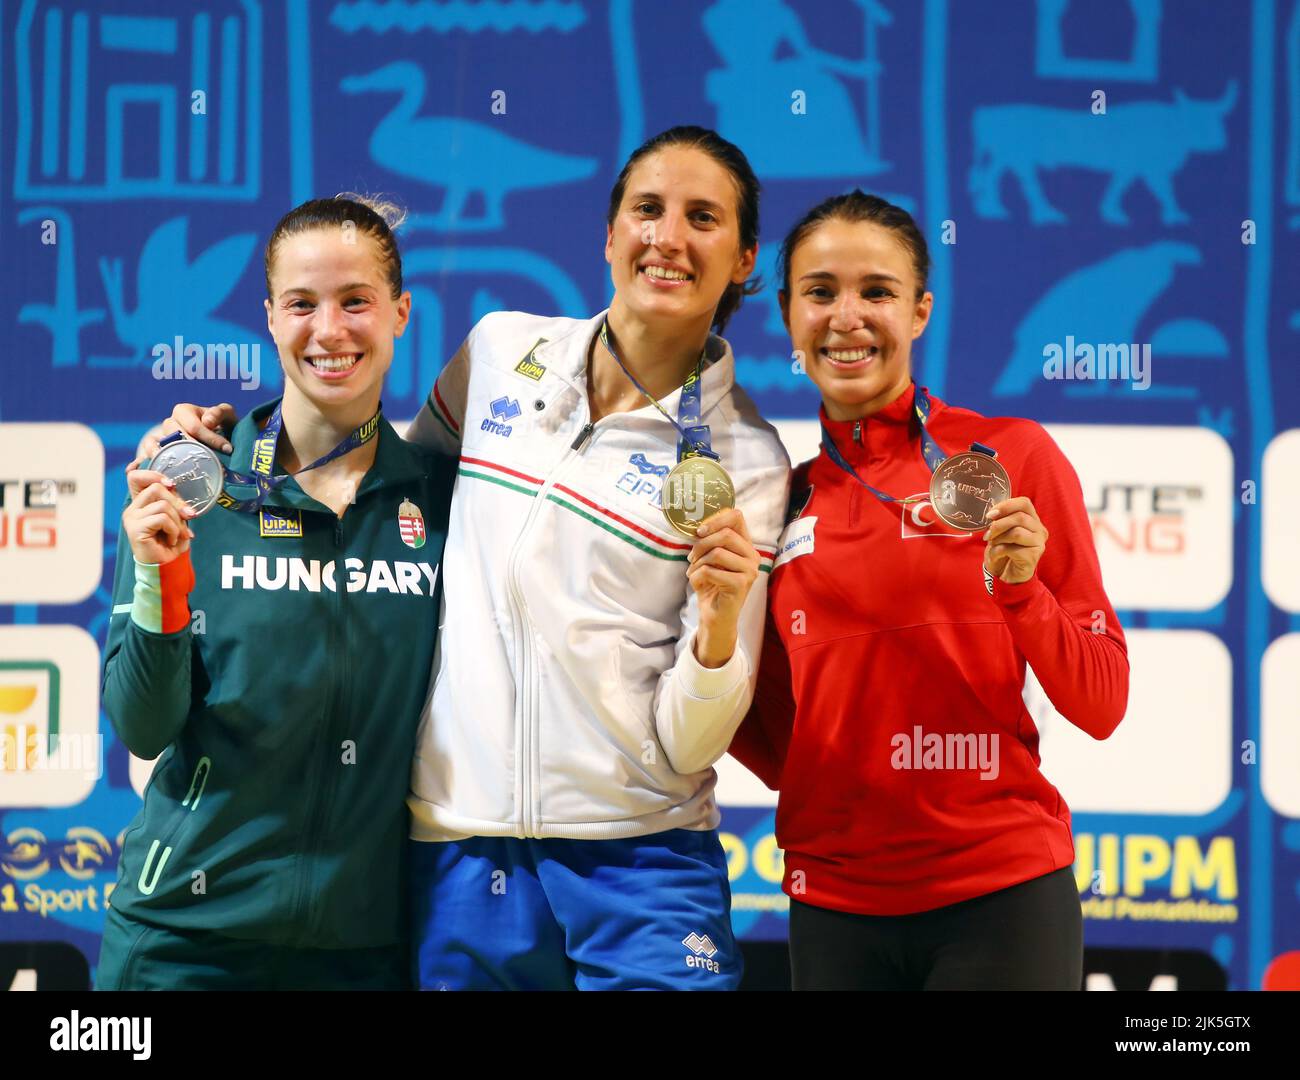 Alexandria, Egypt. 30th July, 2022. Gold medalist Elena Micheli (C) of Italy, silver Medalist Michelle Gulyas (L) of Hungary and bronze Medalist Ilke Ozyuksel of T¨¹rkiye pose after the women's final of the UIPM 2022 Pentathlon World Championships in Alexandria, Egypt, July 30, 2022. Credit: Ahmed Gomaa/Xinhua/Alamy Live News Stock Photo